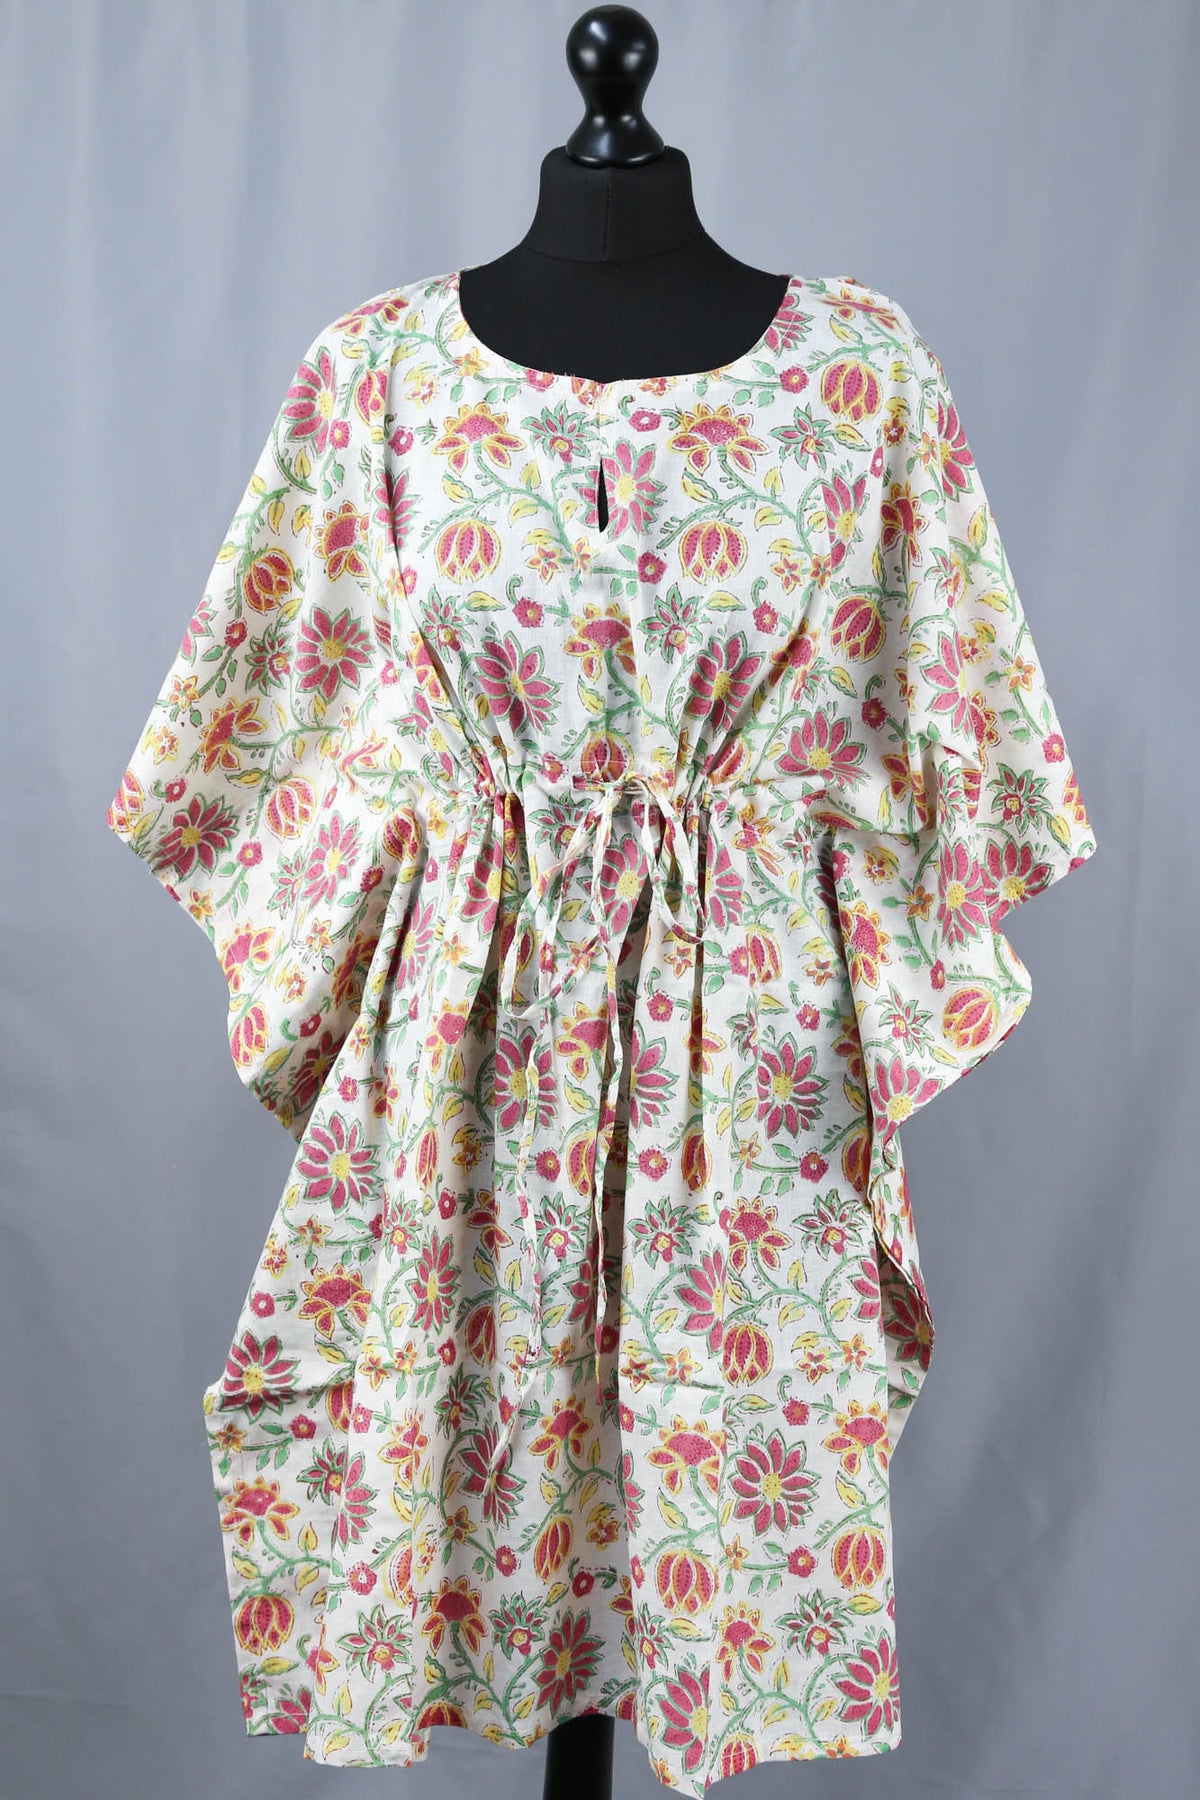 Block Printed Cotton Coverup / Kaftans - Red Floral On Cream Base